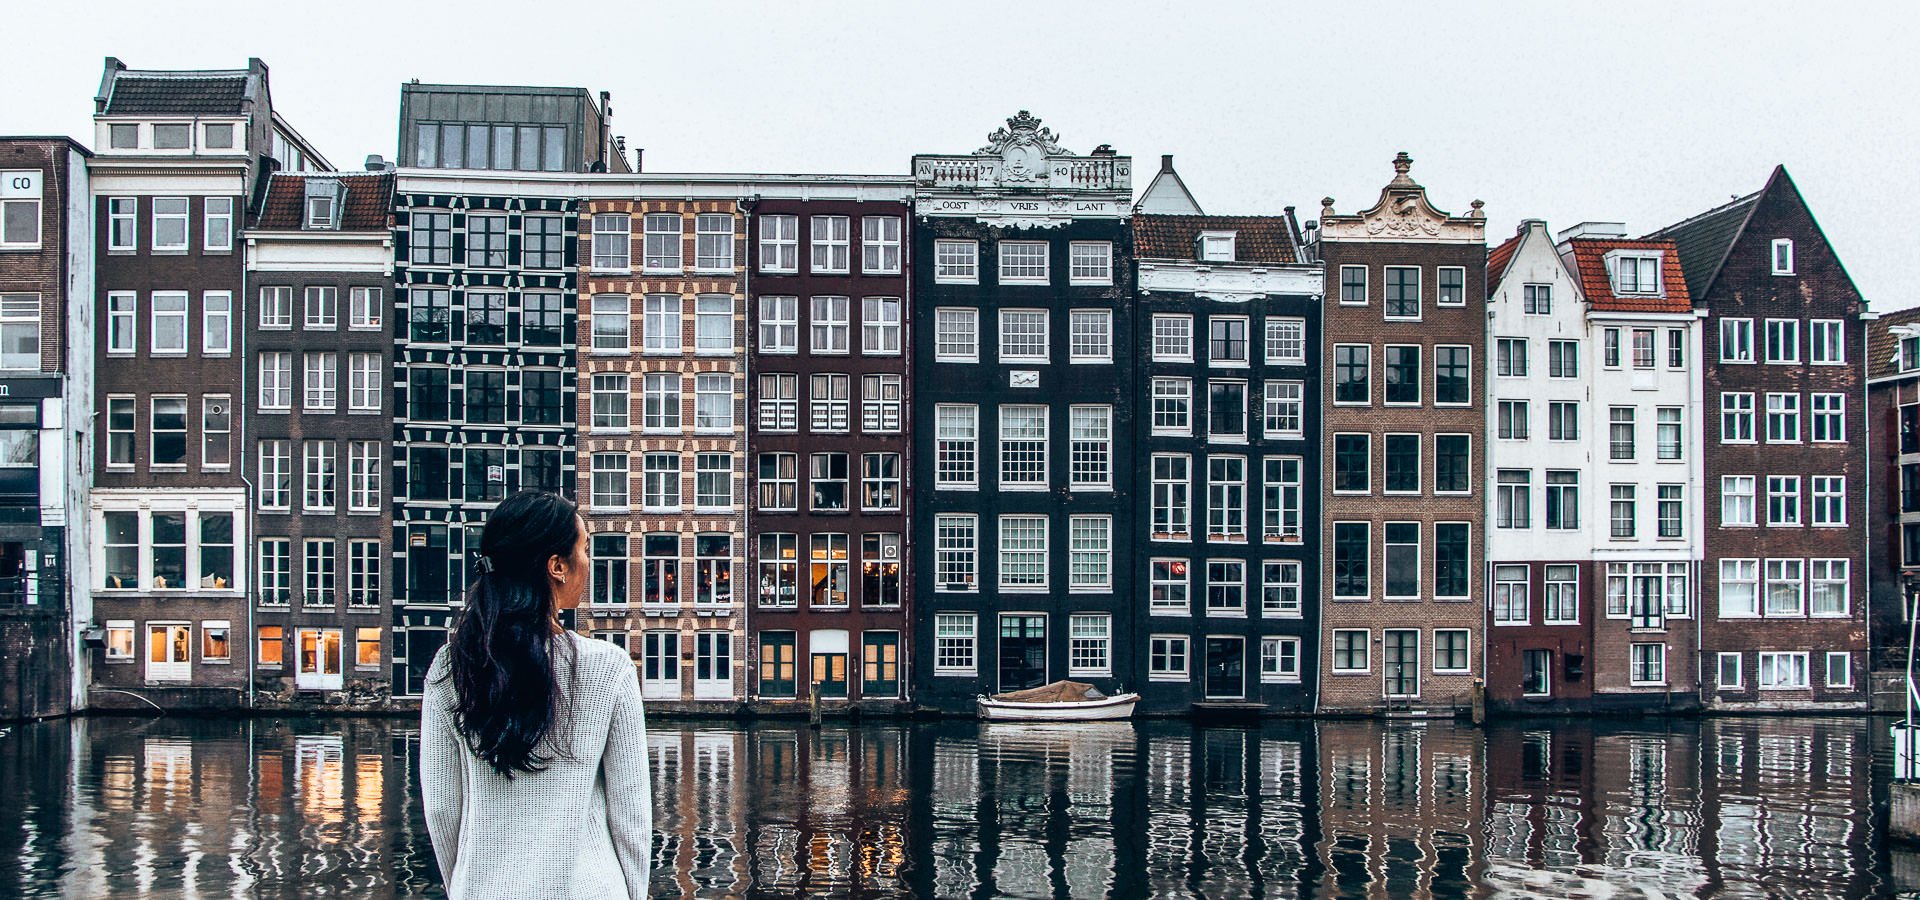 A Non Touristy Weekend Guide To Amsterdam | 48 hours in edinburgh 4